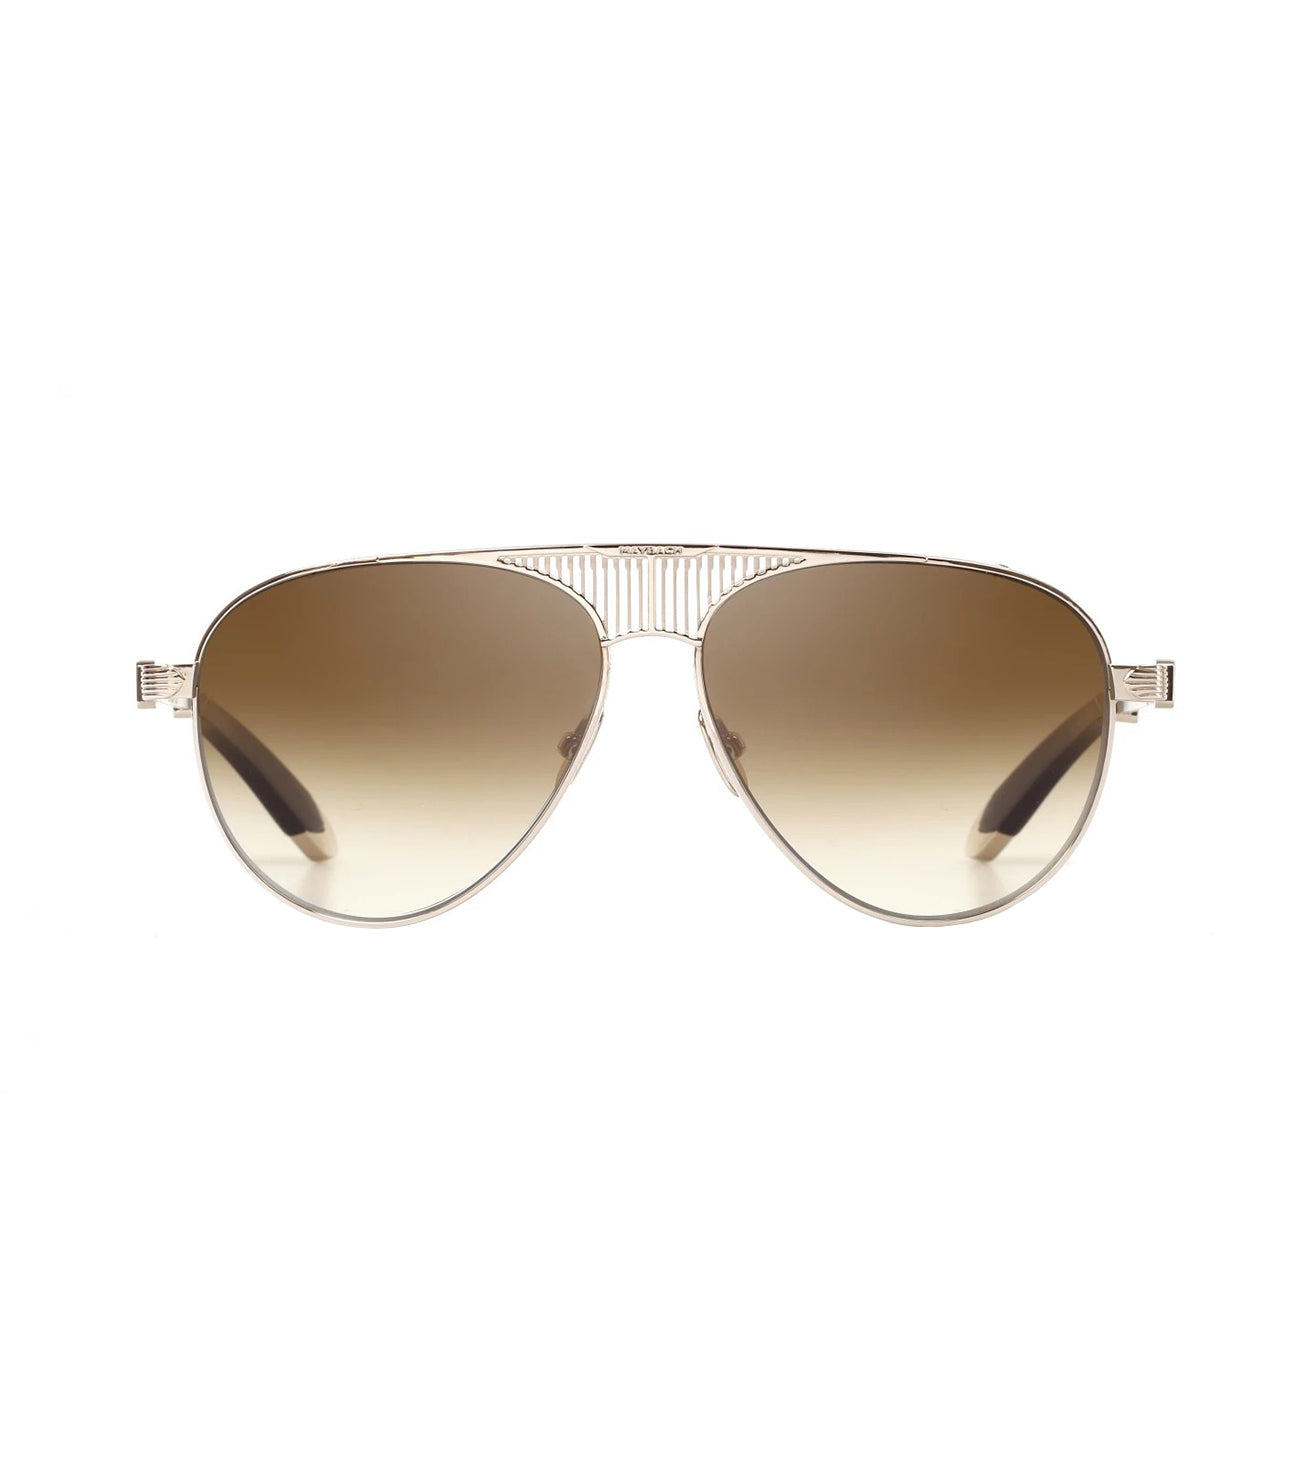 Maybach The Vision - I Unisex Brown Aviator Sunglasses